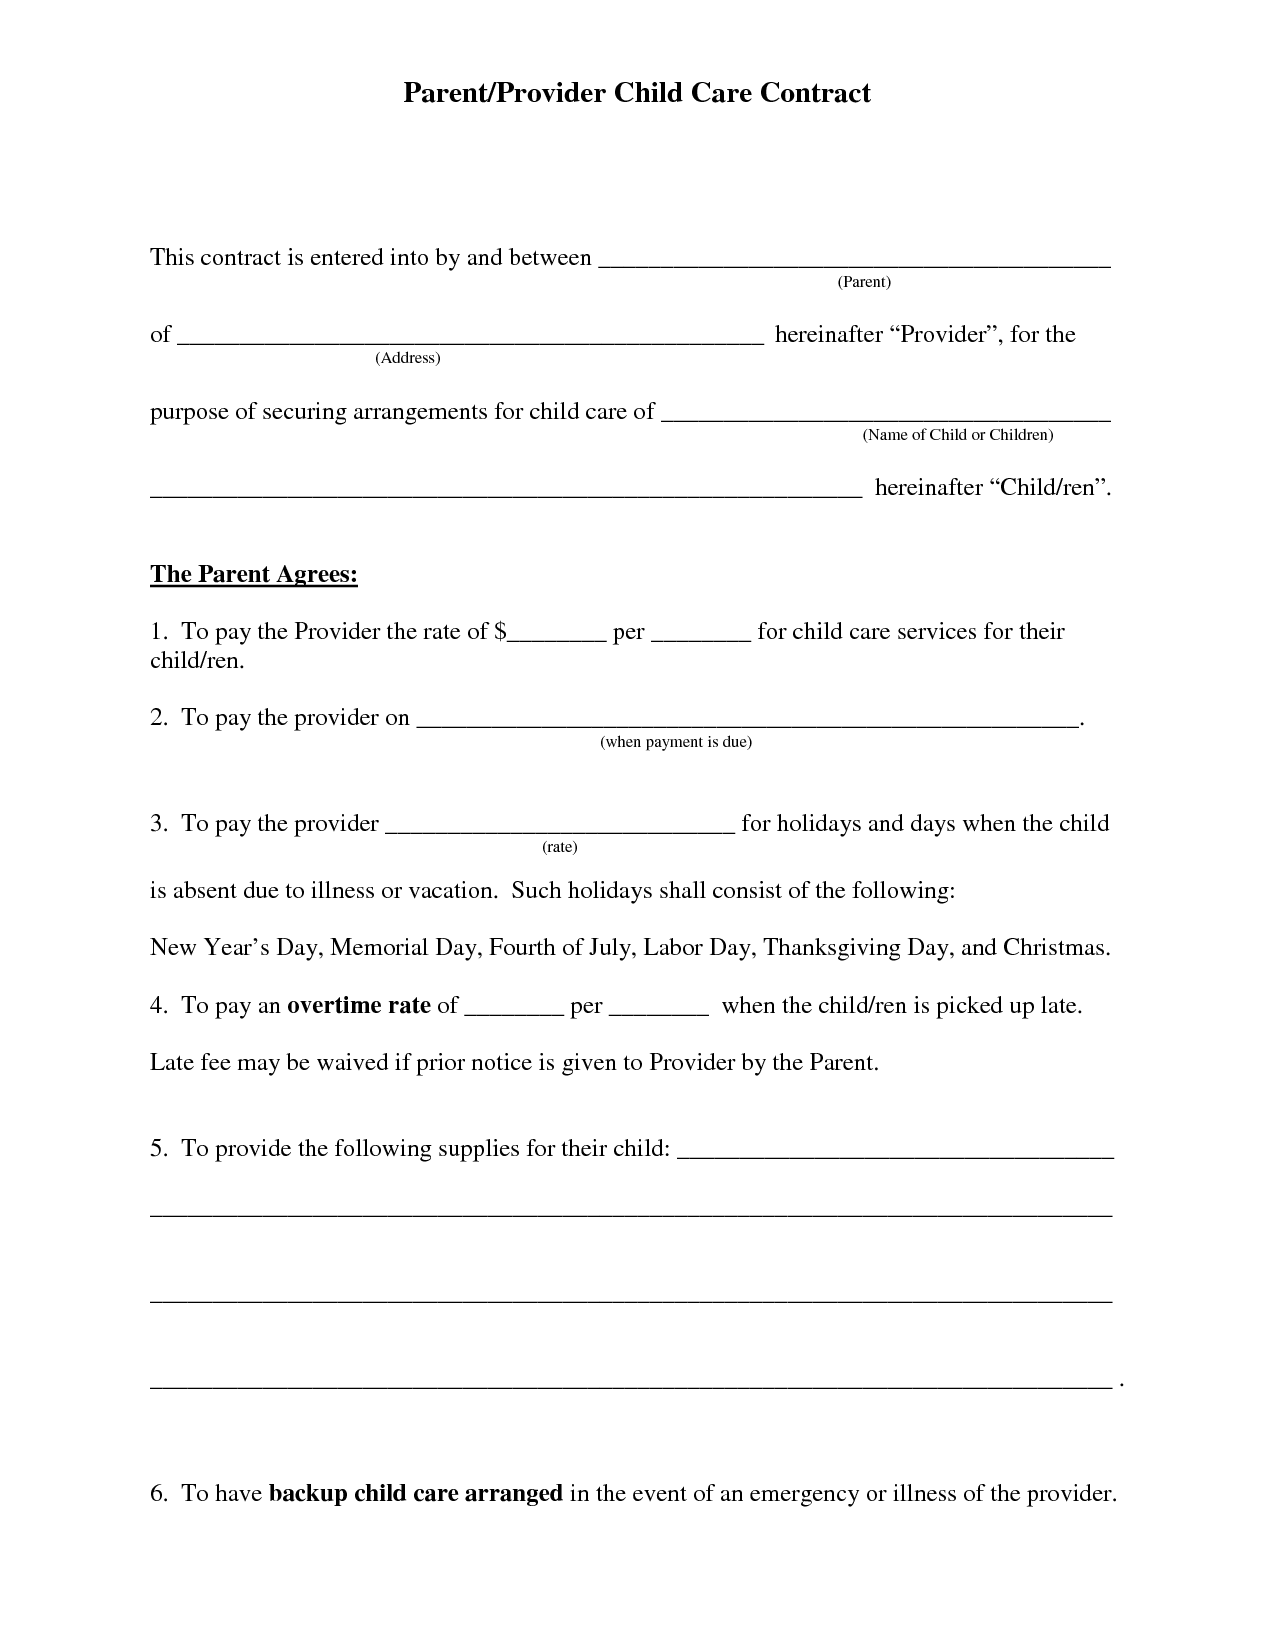 Free Daycare Contract Forms | Daycare forms | Daycare contract 